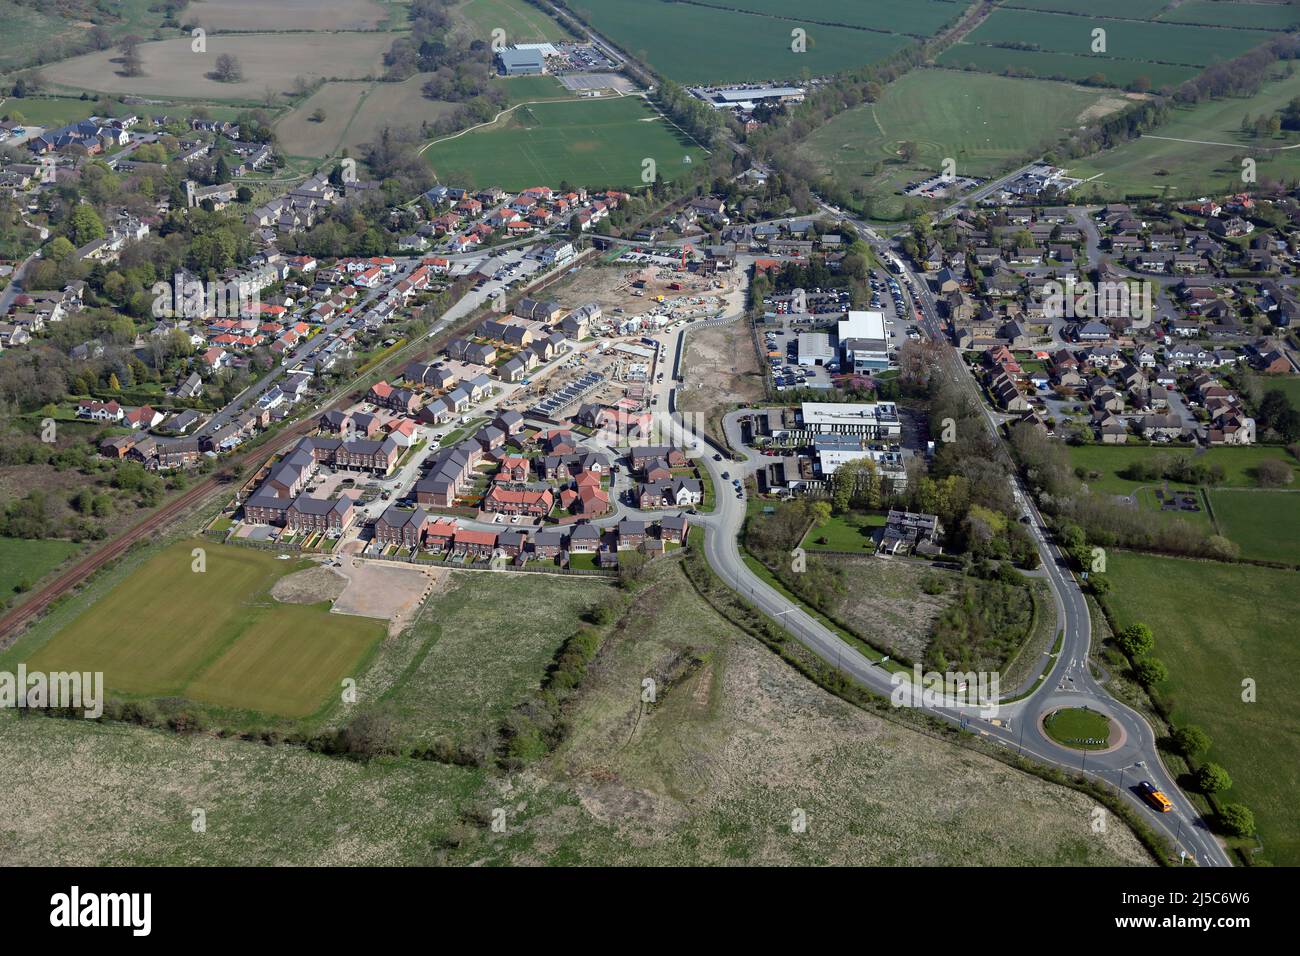 aerial view of a new housing development built on the site of the former Dunlopillow factory at Pannal, near Harrogate, North Yorkshire, UK Stock Photo